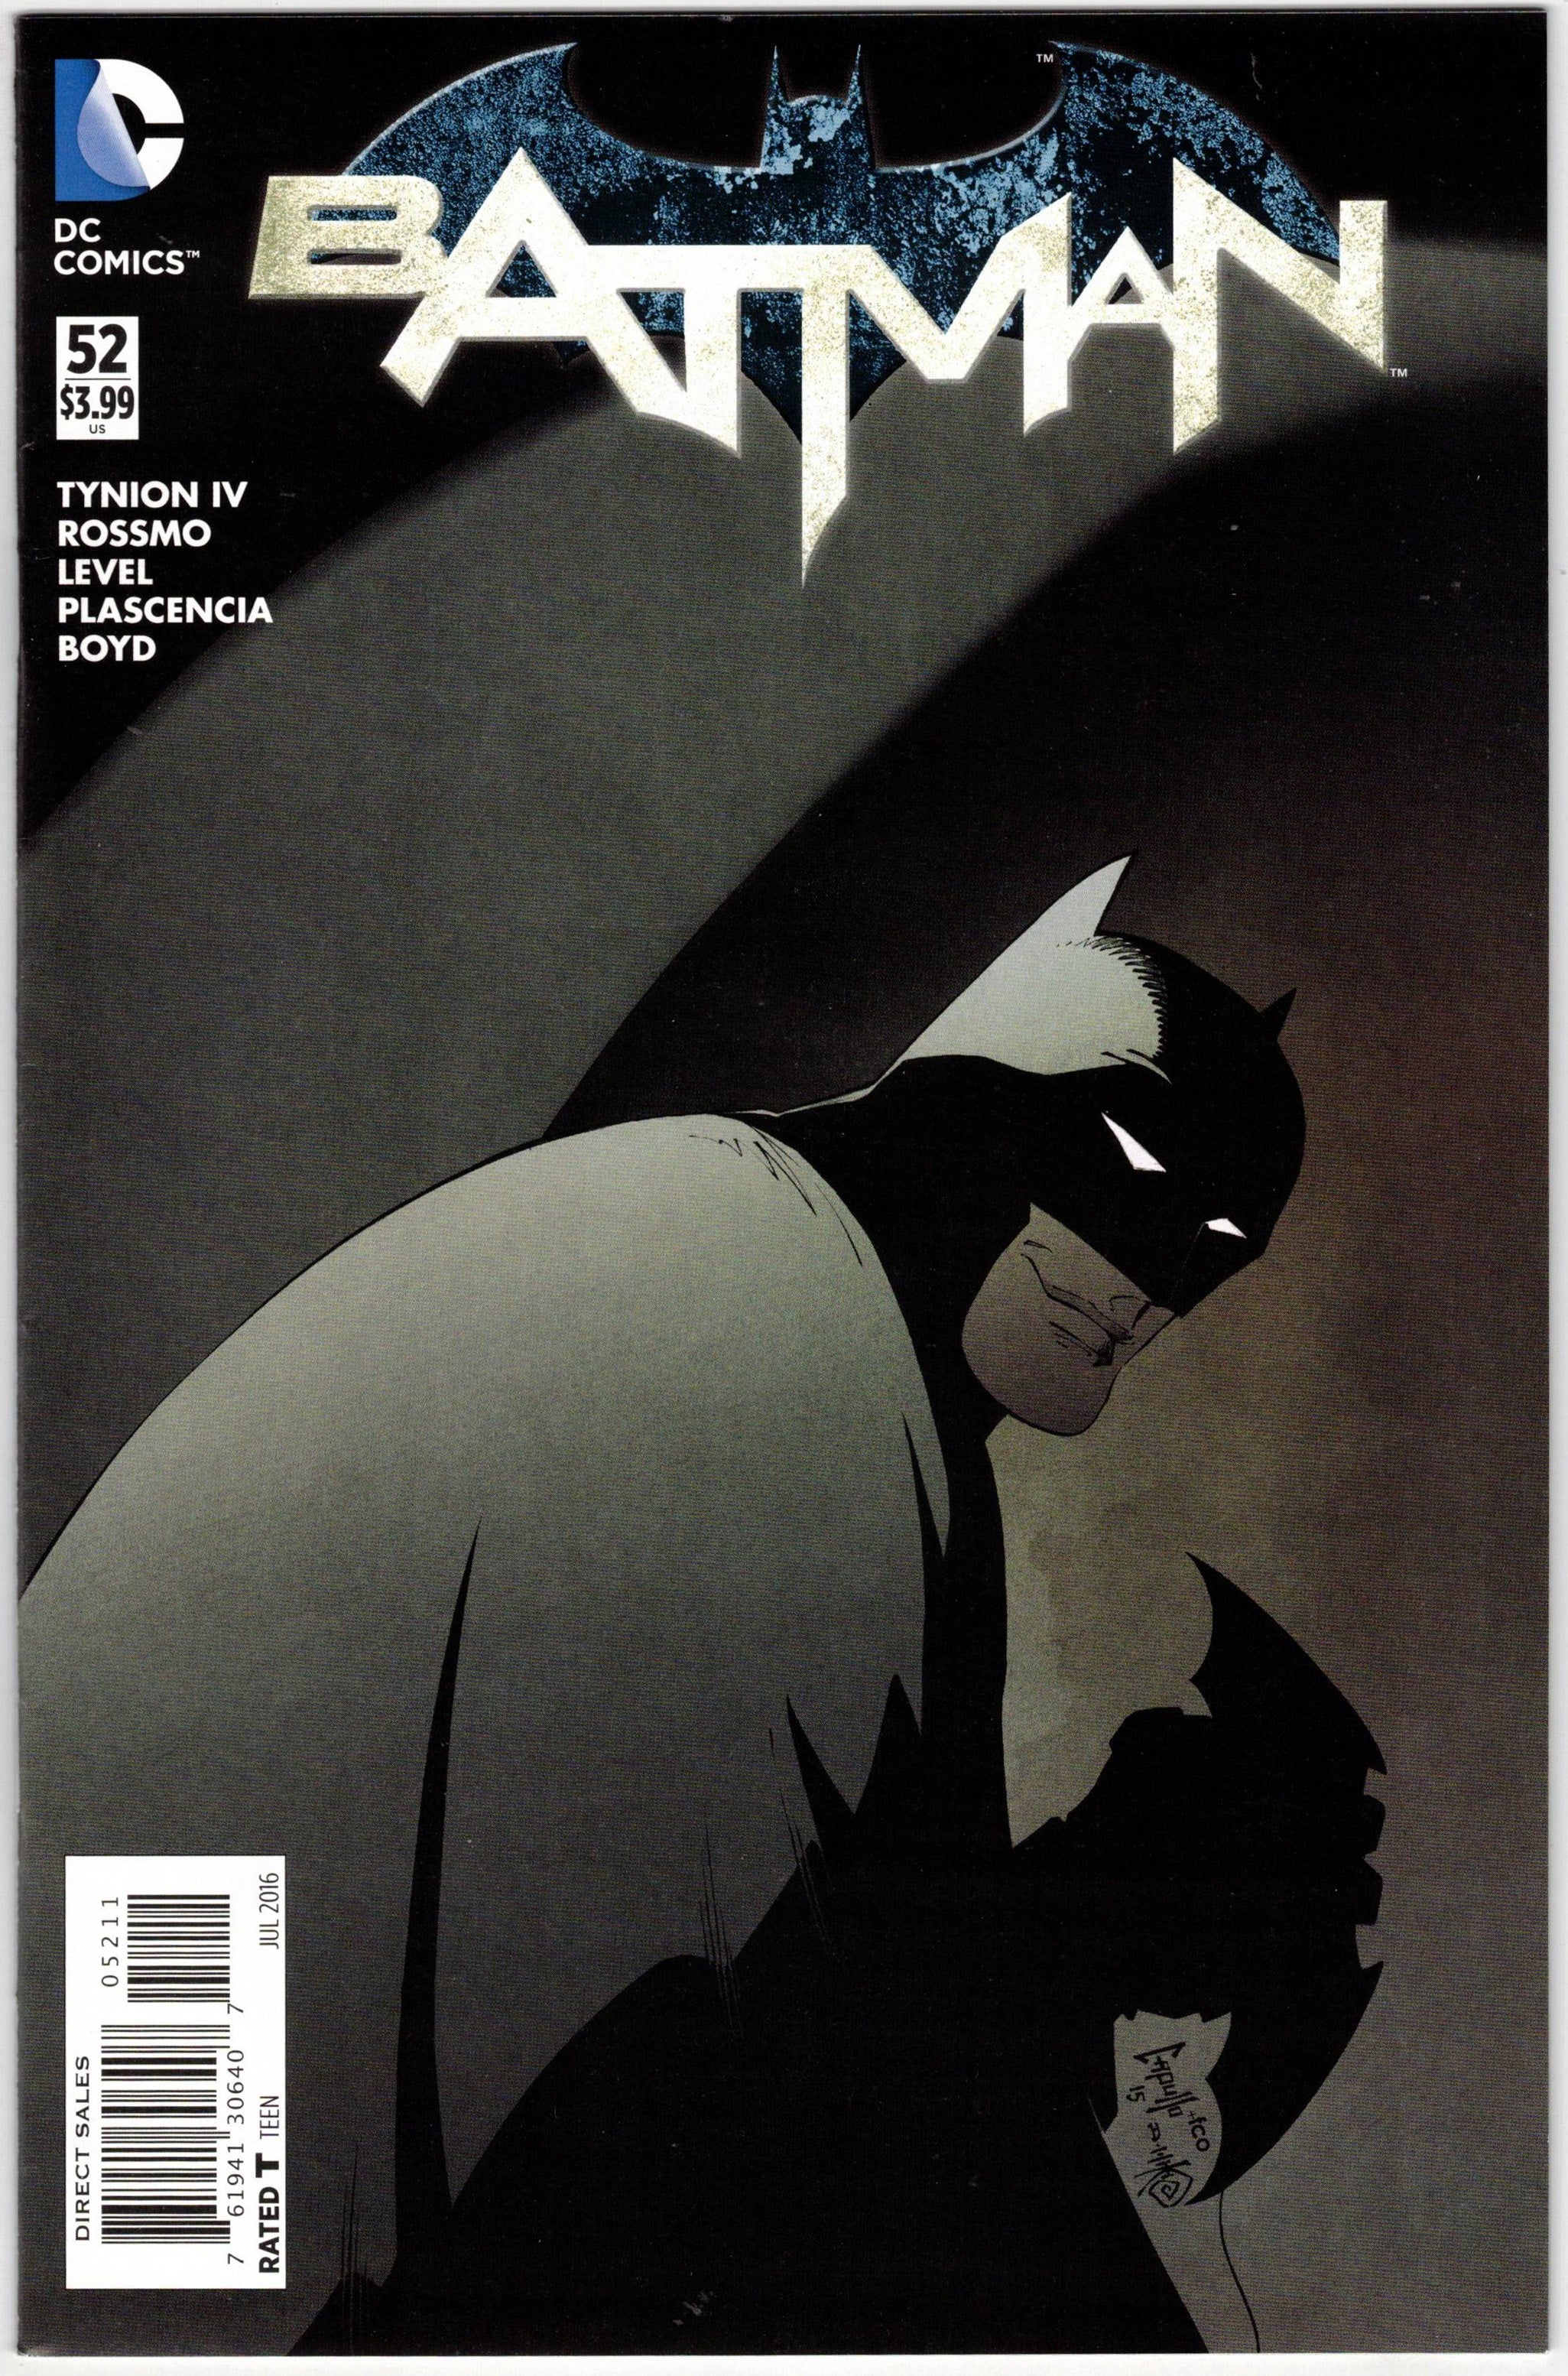 Photo of Batman, Vol. 2 (2016) Issue 52A - Comic sold by Stronghold Collectibles